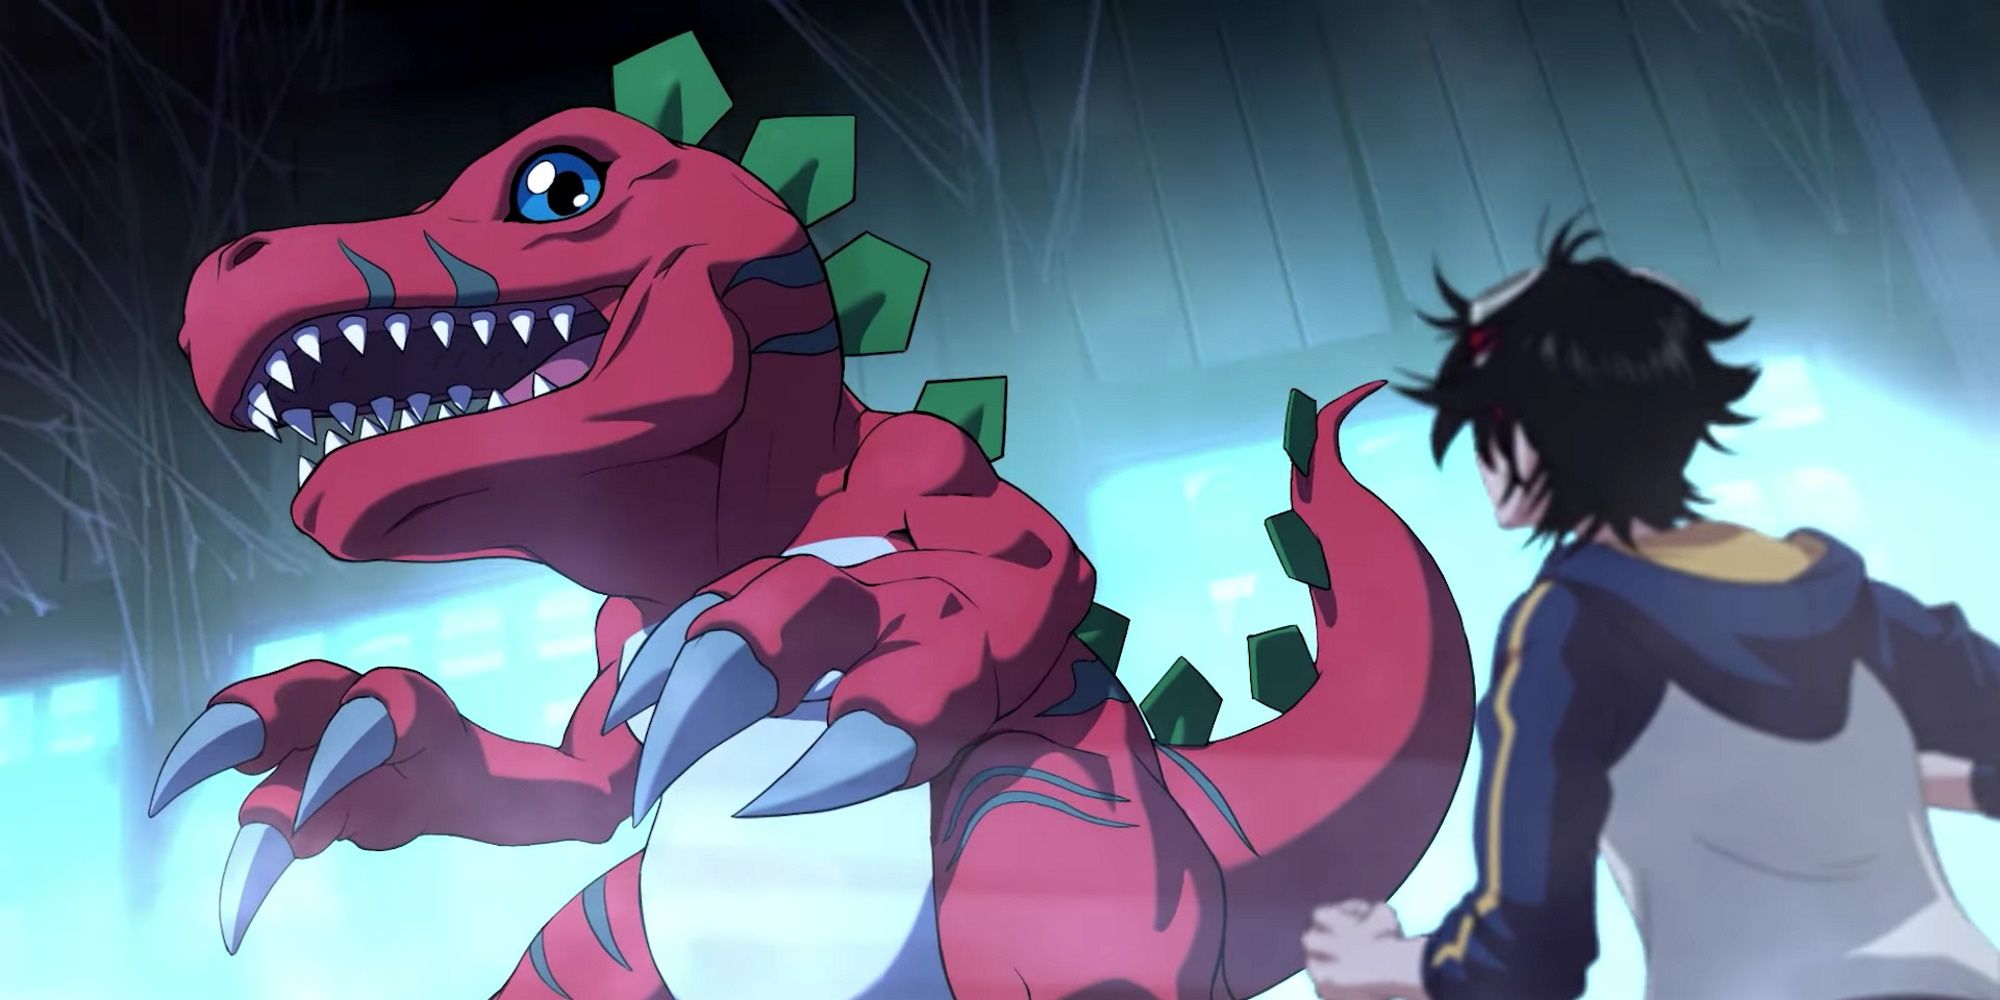 Digimon Survive character and large dinosaur Digimon